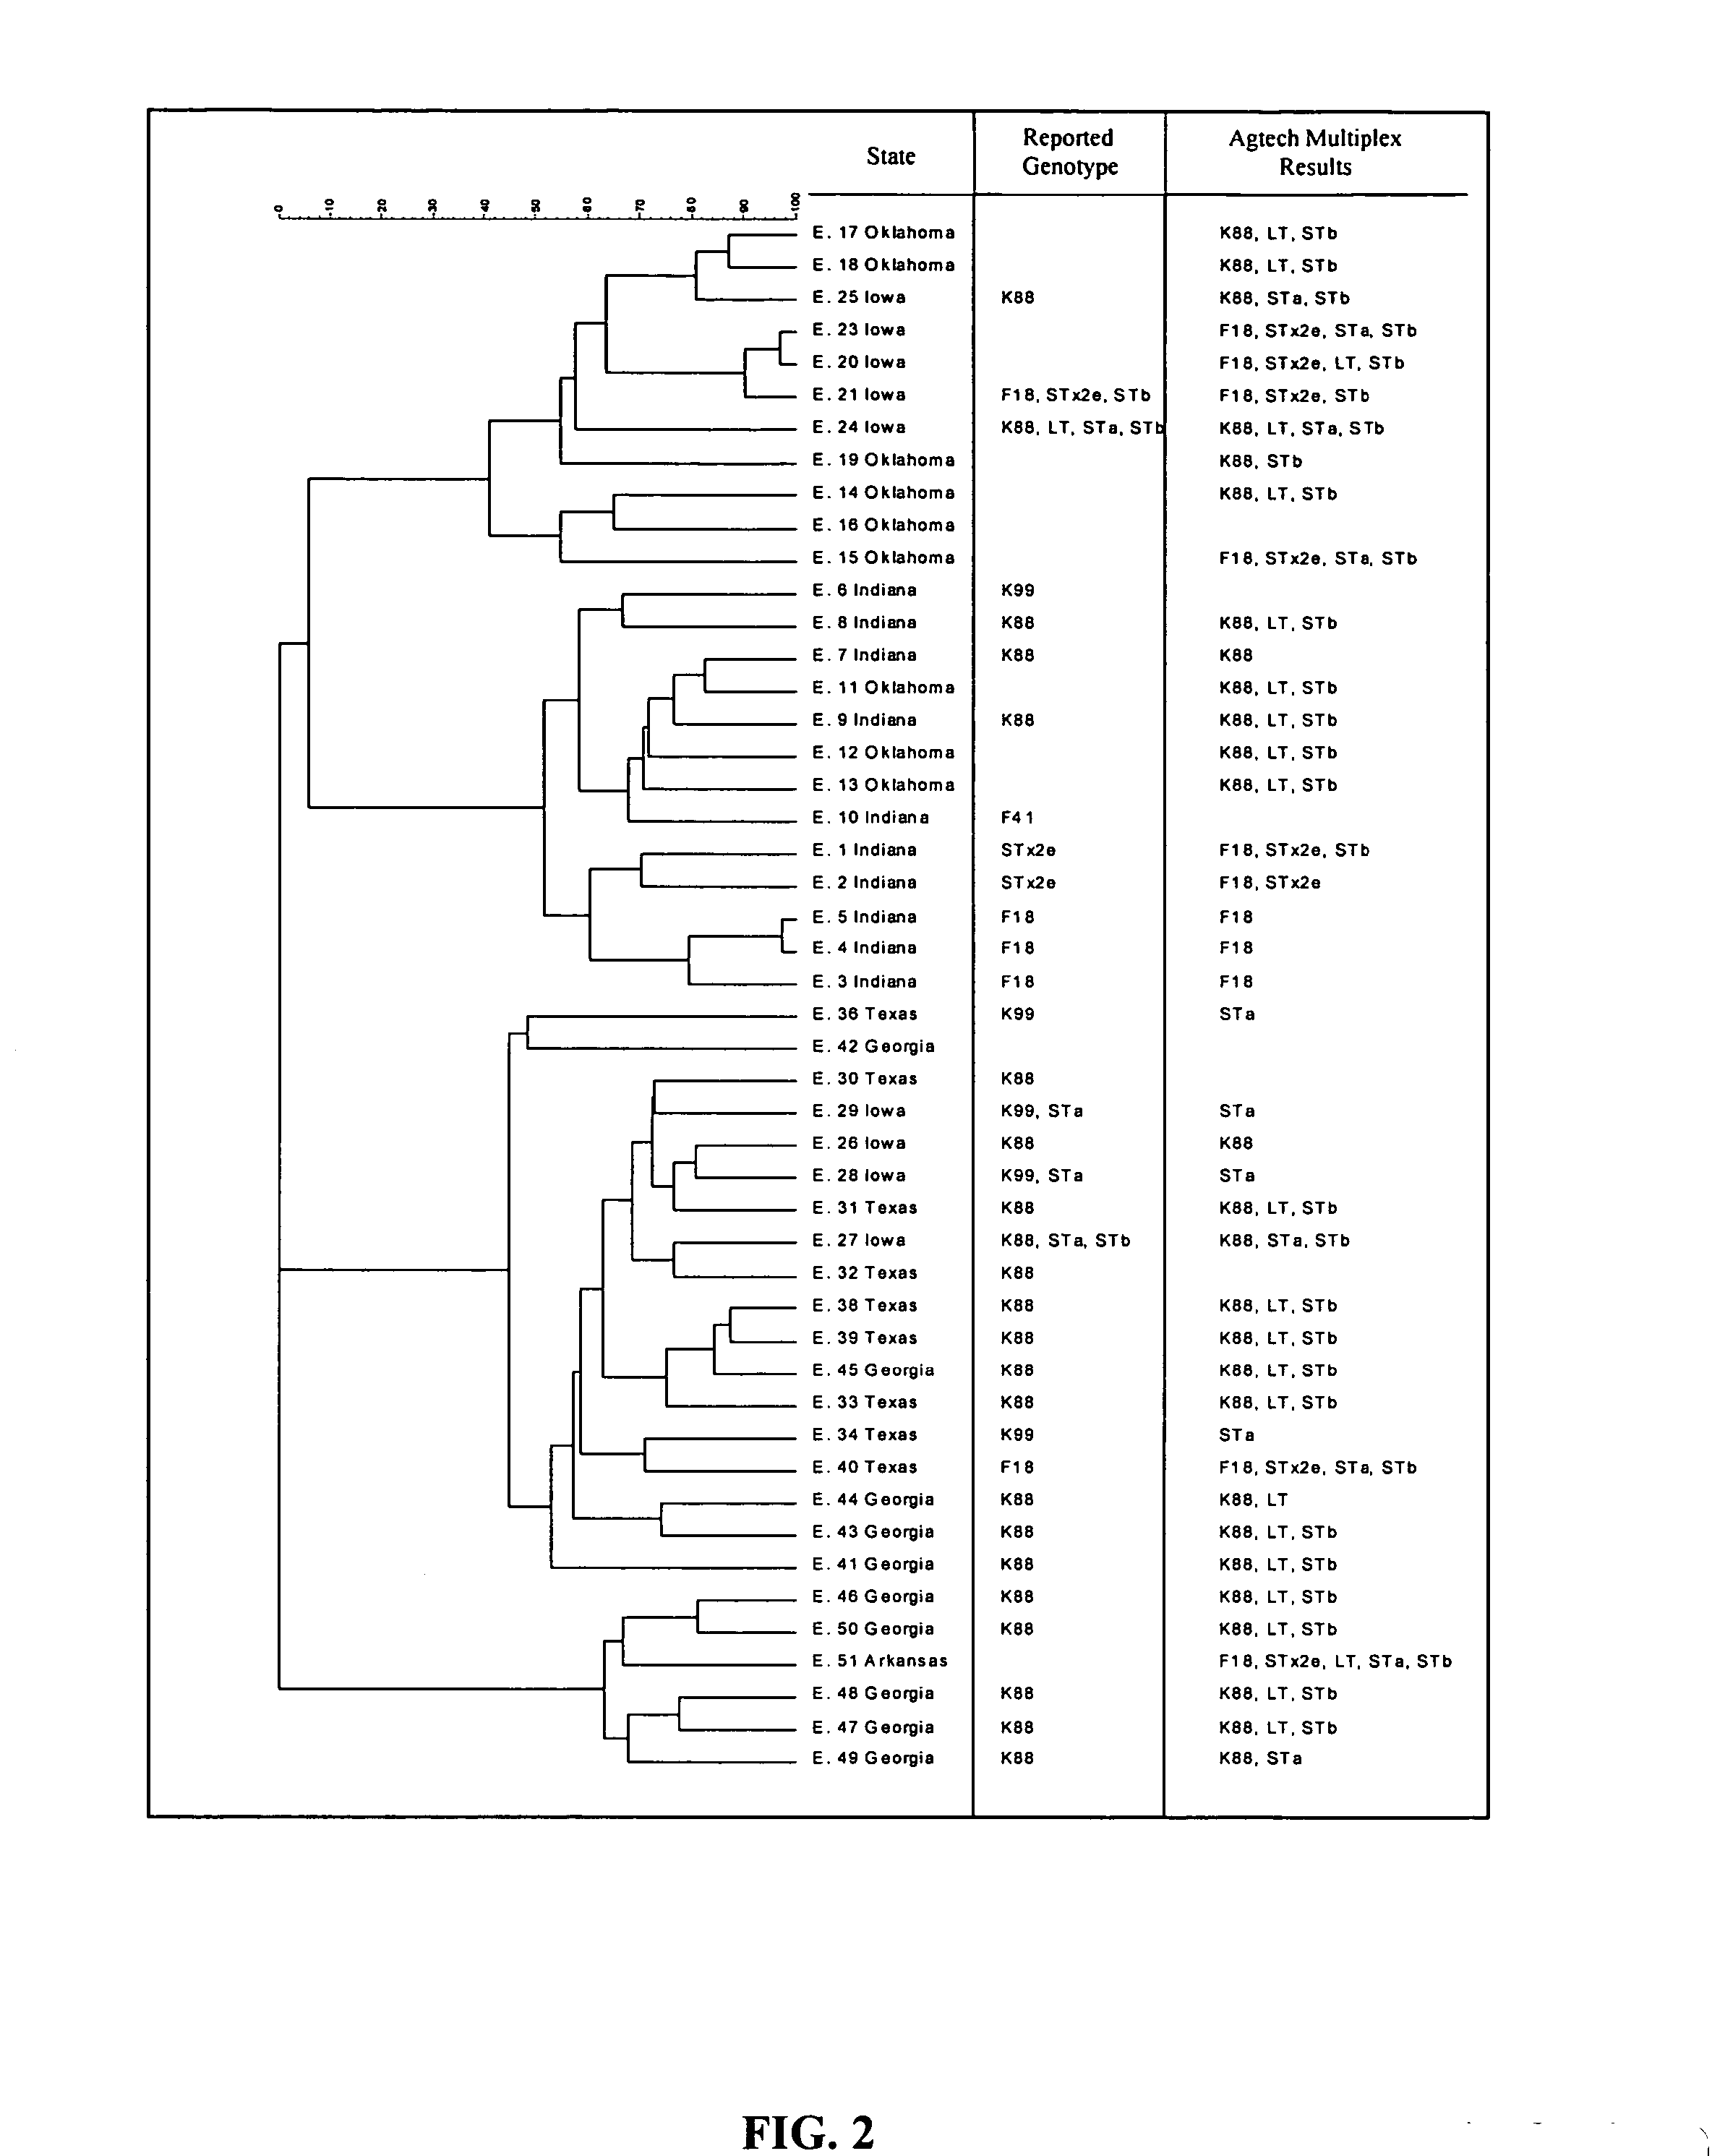 Method and composition for reducing E. coli disease and enhancing performance